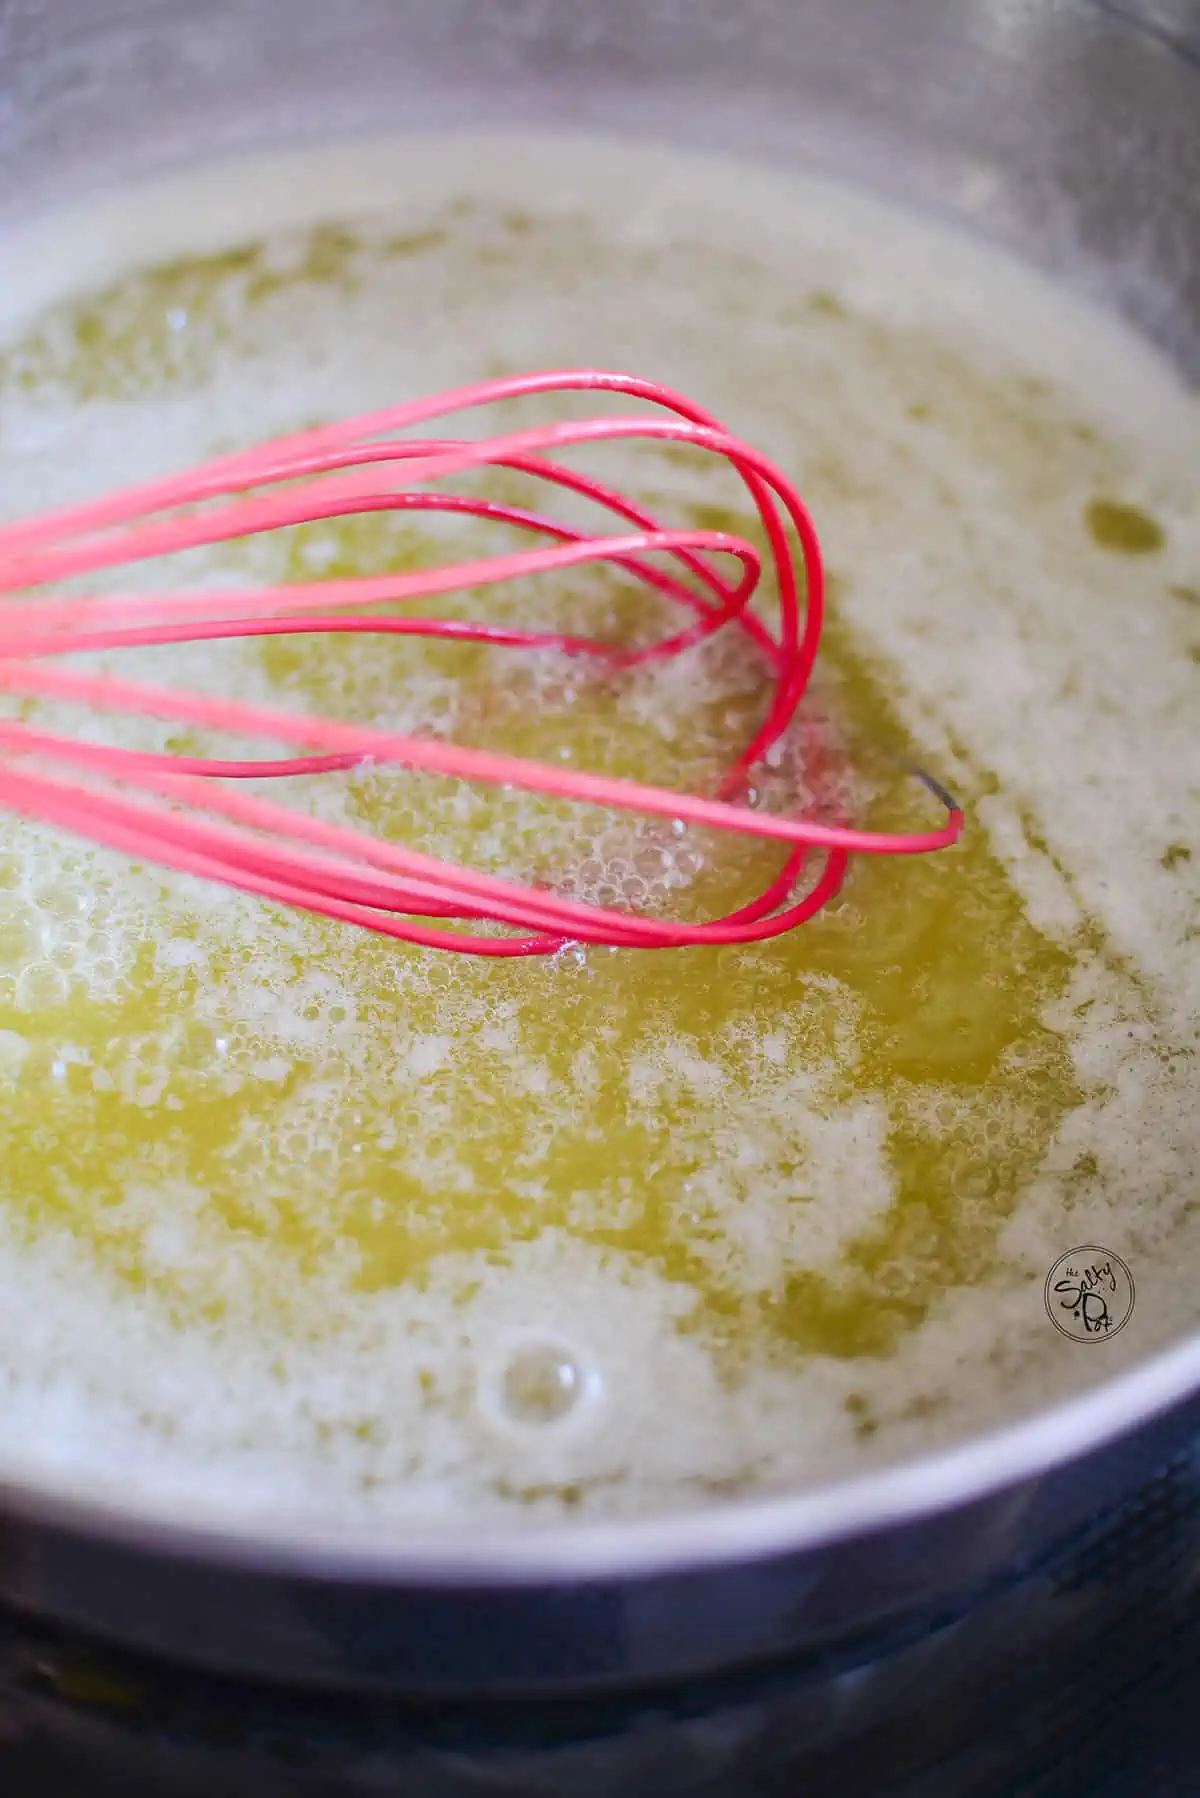 The butter is completely melted and a red whisk is moving the butter around so it doesn't burn in the pan.